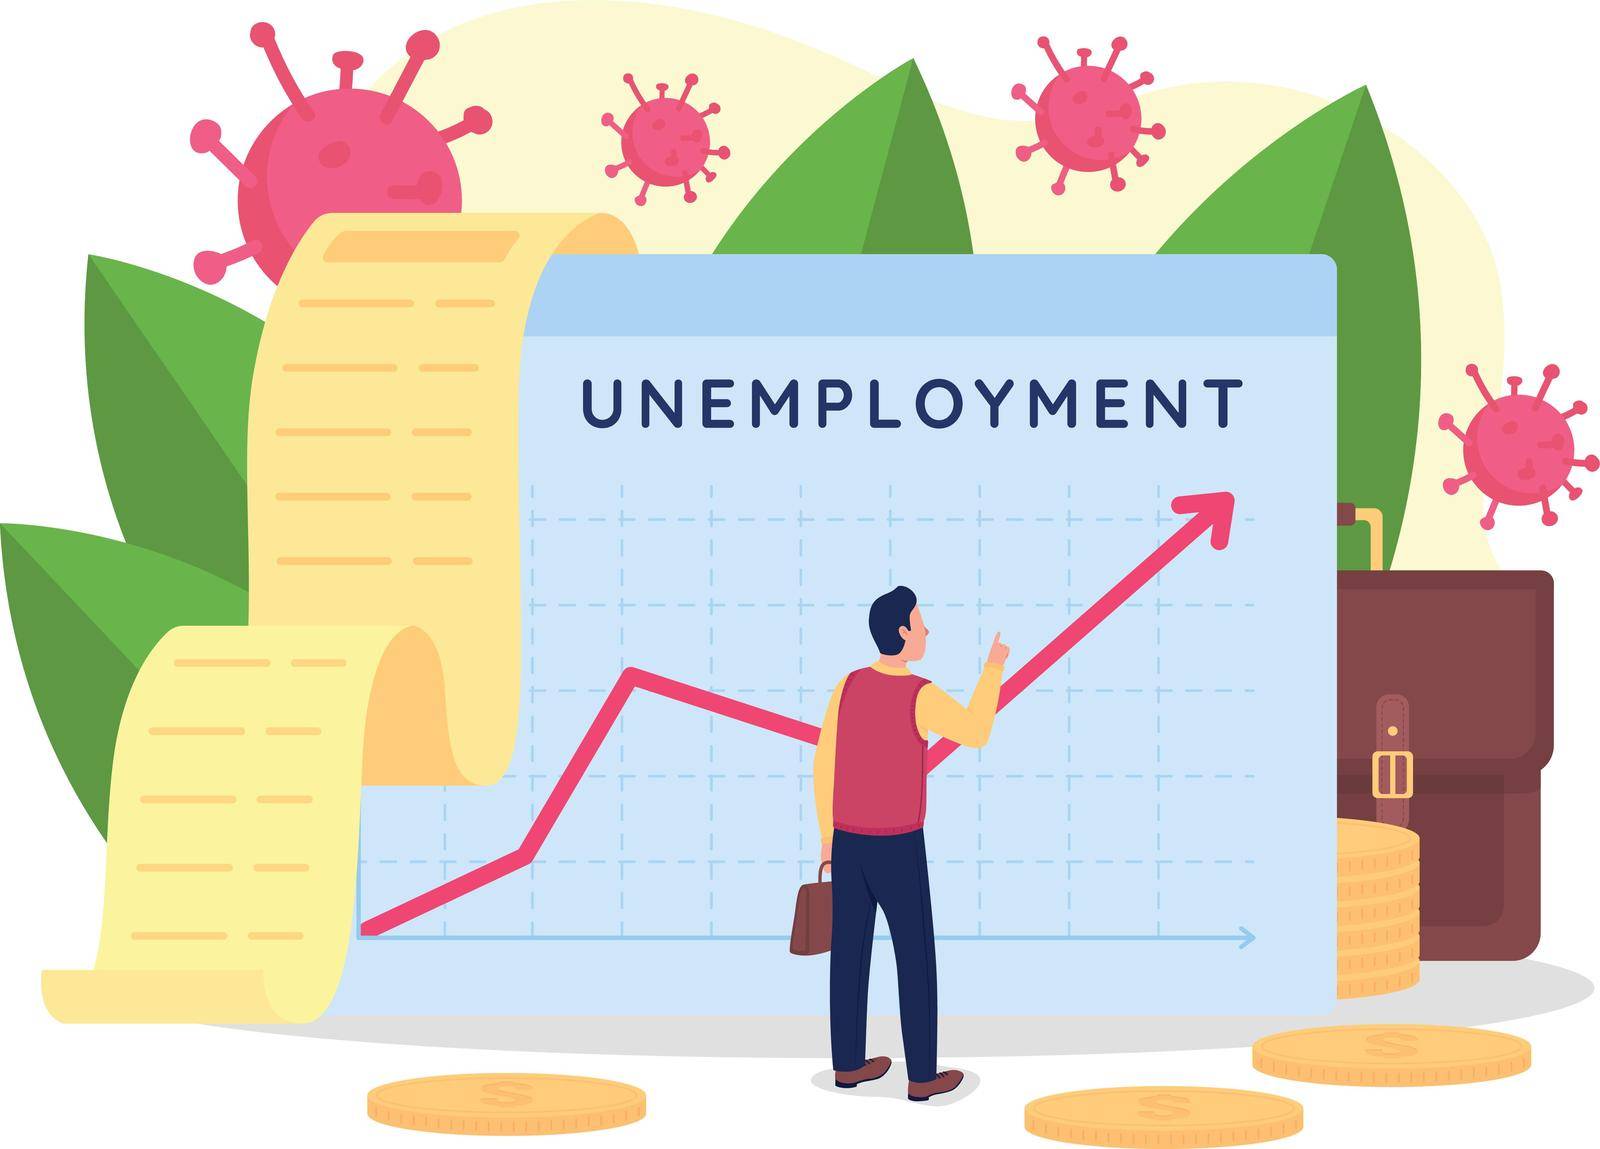 Rising unemployment rate flat concept vector illustration by ntl